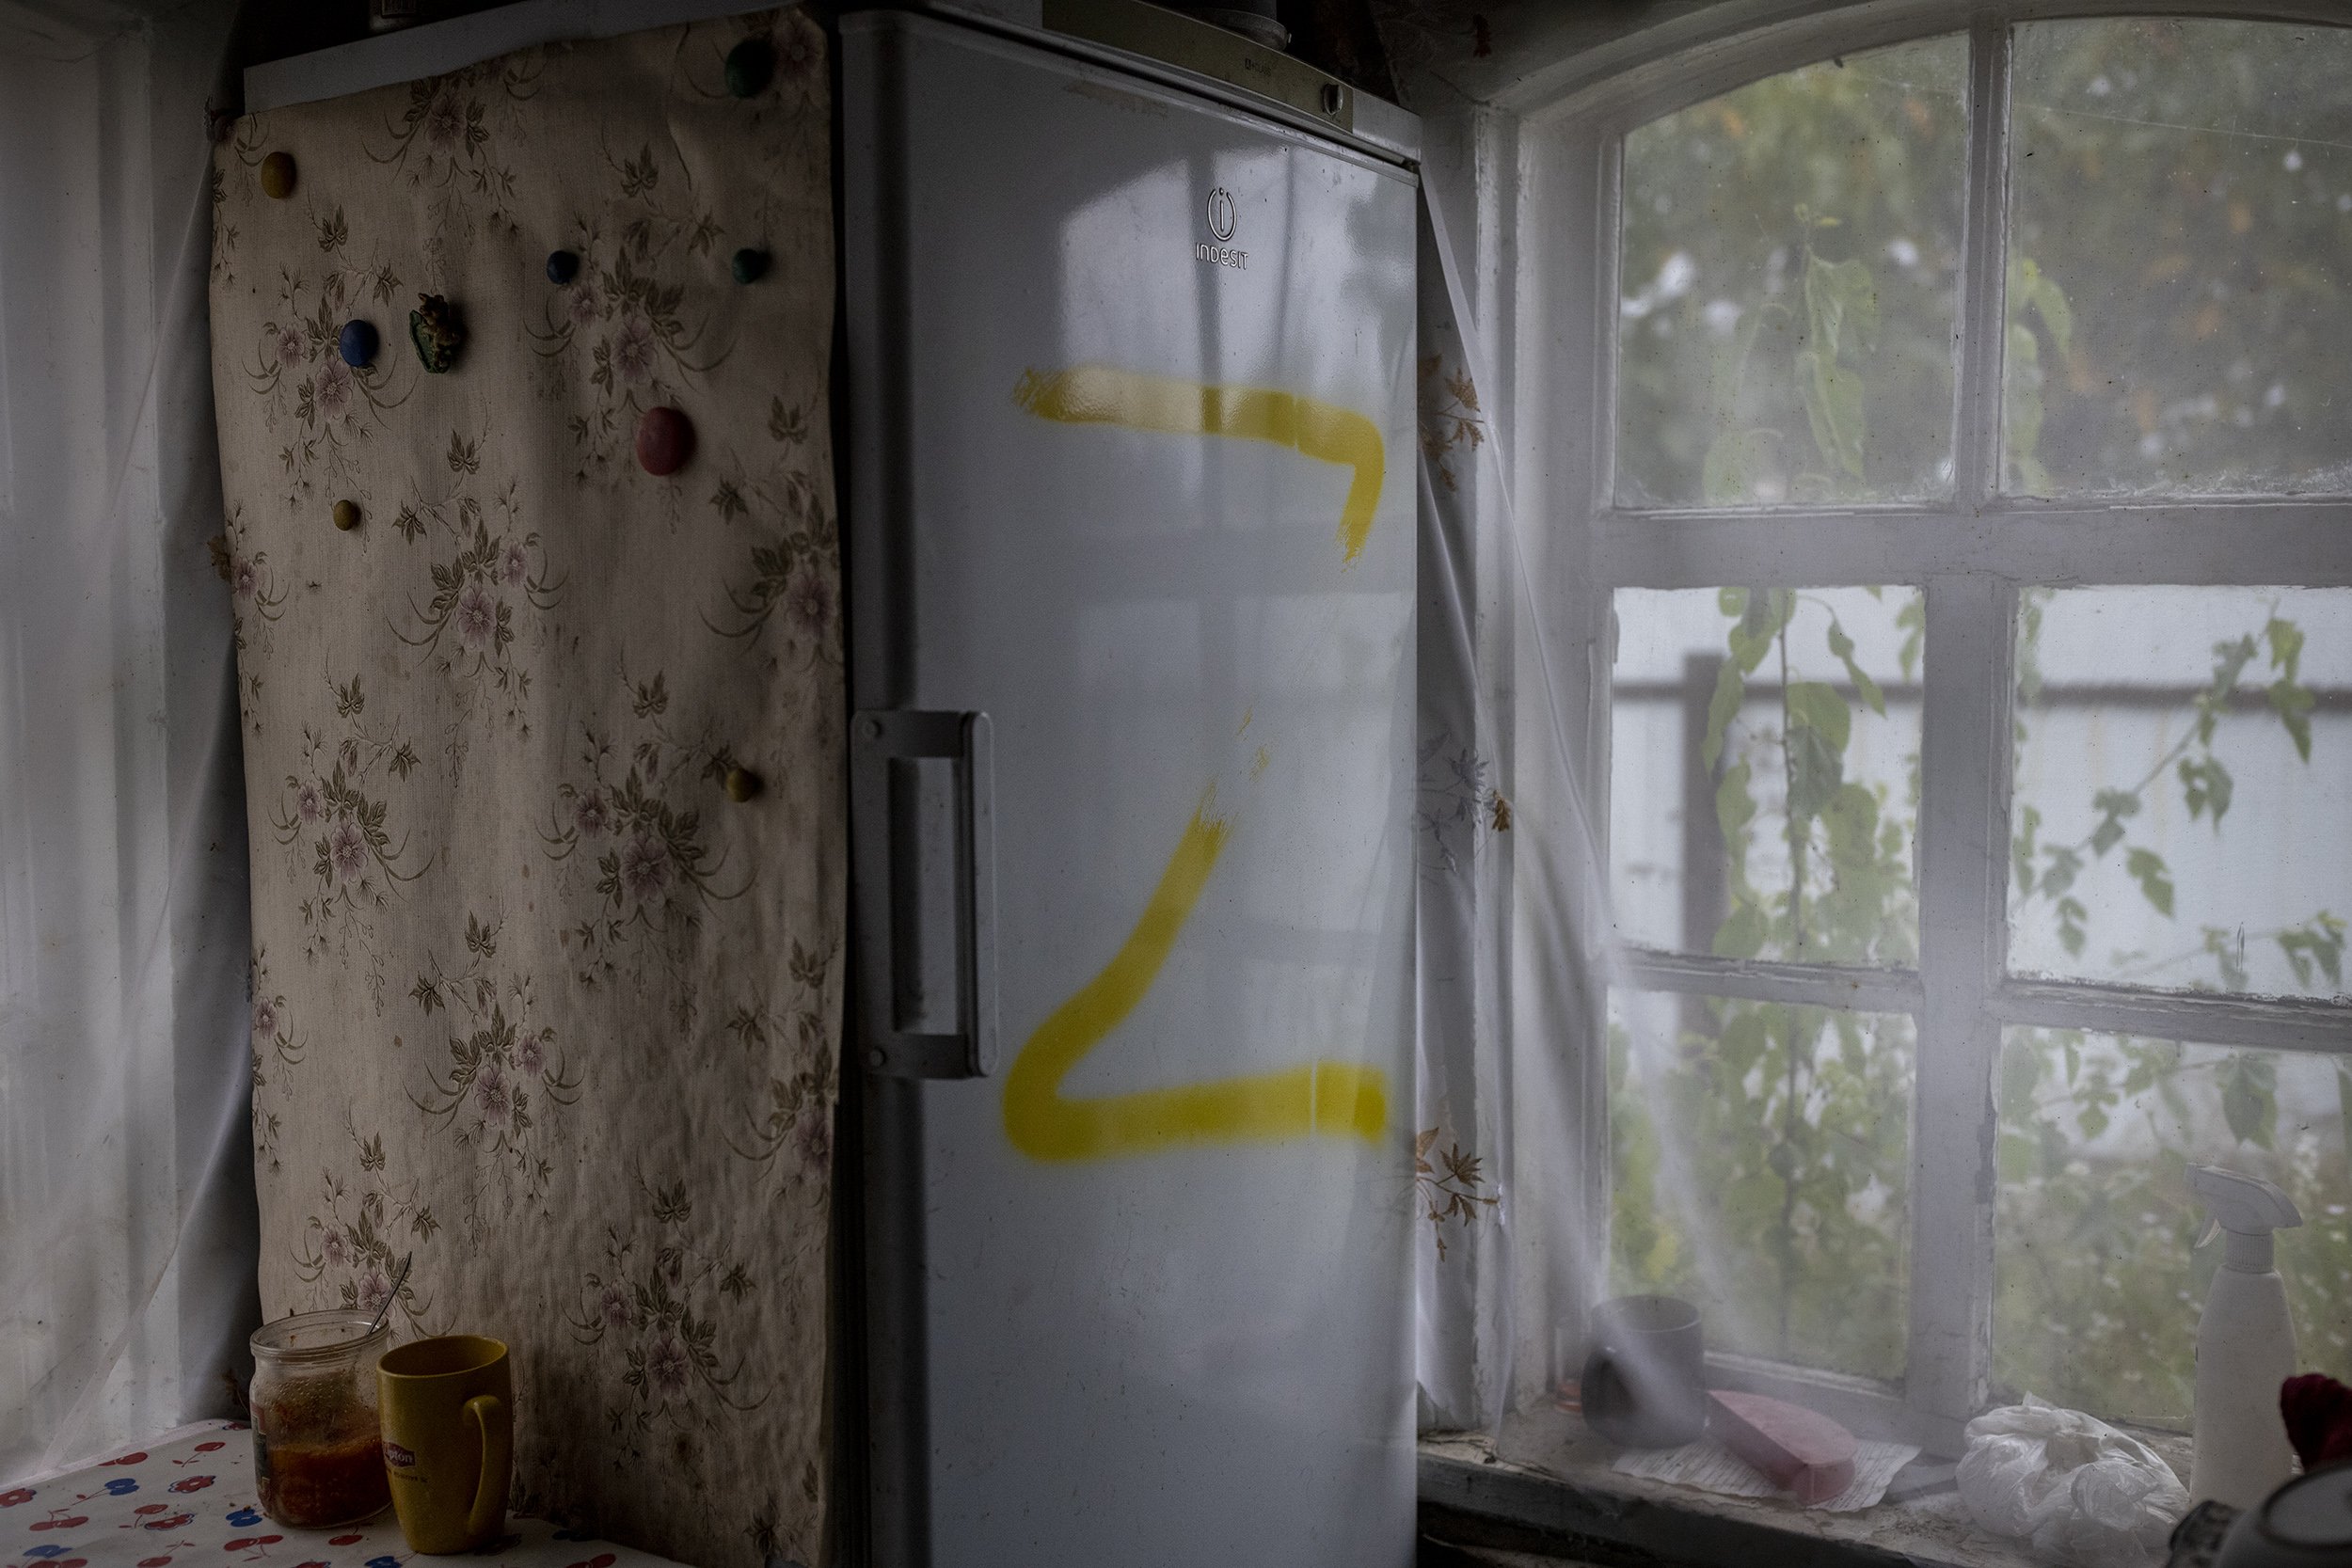  Russian troops spray painted the letter Z, which has become the symbol of their invasion of Ukraine, all over the home of a Ukrainian military family, as they sought to intimidate the wife into giving up her husbands whereabouts. October, 2022. 